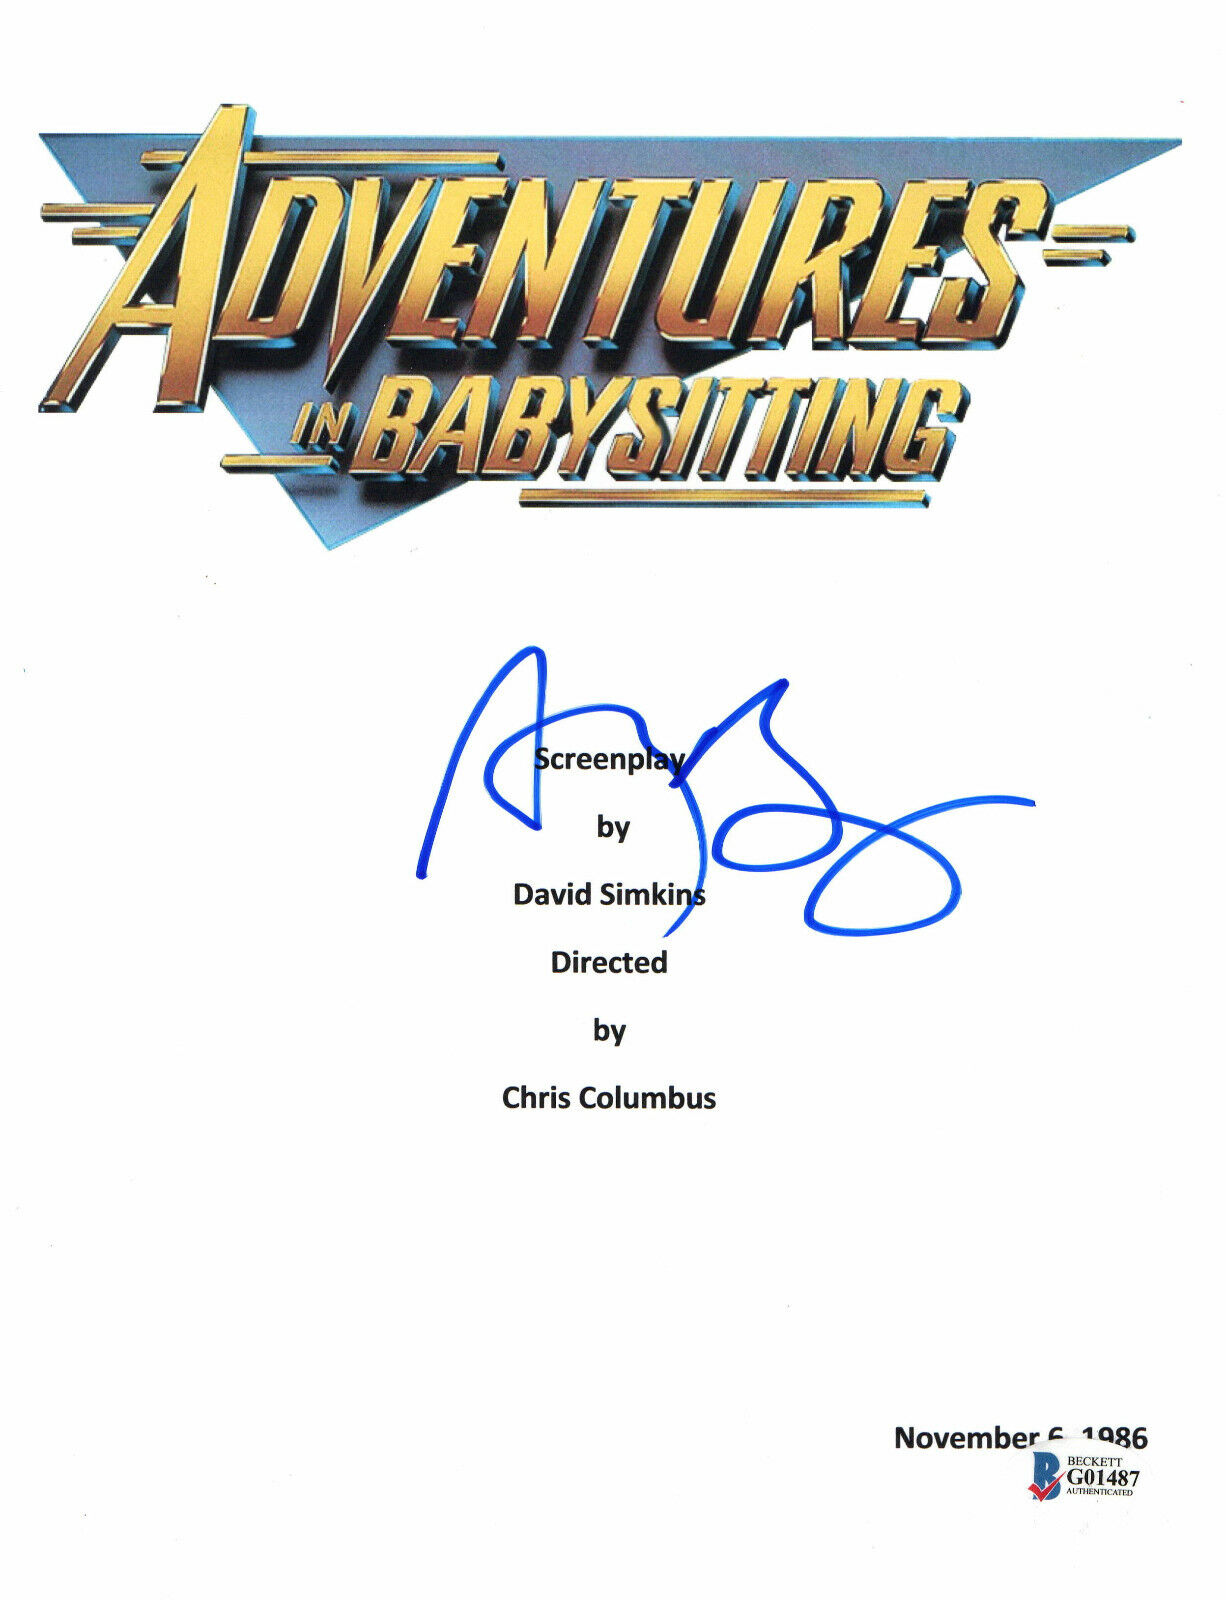 ANTHONY RAPP SIGNED AUTOGRAPH ADVENTURES IN BABYSITTING FULL SCRIPT BECKETT BAS 